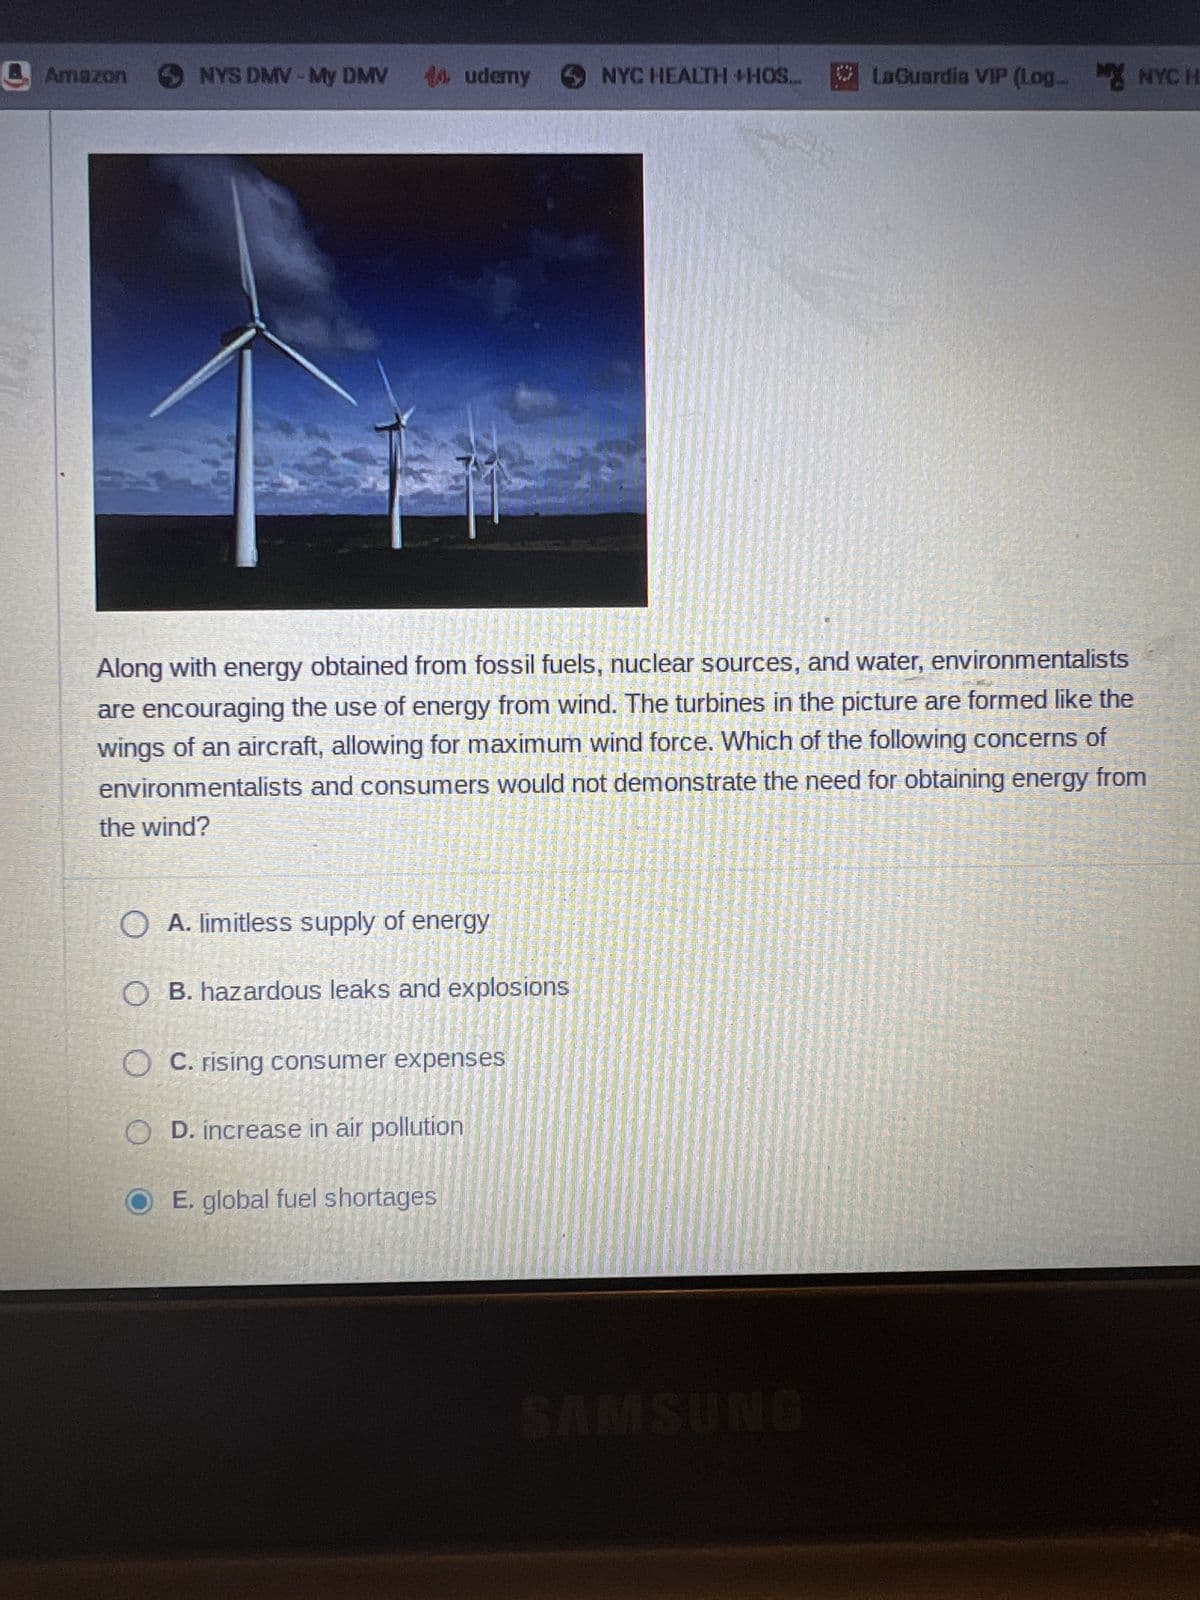 Amazon
NYS DMV-My DMV 14.udemy
5
OA. limitless supply of energy
OB. hazardous leaks and explosions
OC. rising consumer expenses
OD. increase in air pollution
OE. global fuel shortages
NYC HEALTH +HOS..
Along with energy obtained from fossil fuels, nuclear sources, and water, environmentalists
are encouraging the use of energy from wind. The turbines in the picture are formed like the
wings of an aircraft, allowing for maximum wind force. Which of the following concerns of
environmentalists and consumers would not demonstrate the need for obtaining energy from
the wind?
LaGuardia VIP (Log_ NYC H
SAMSUNG